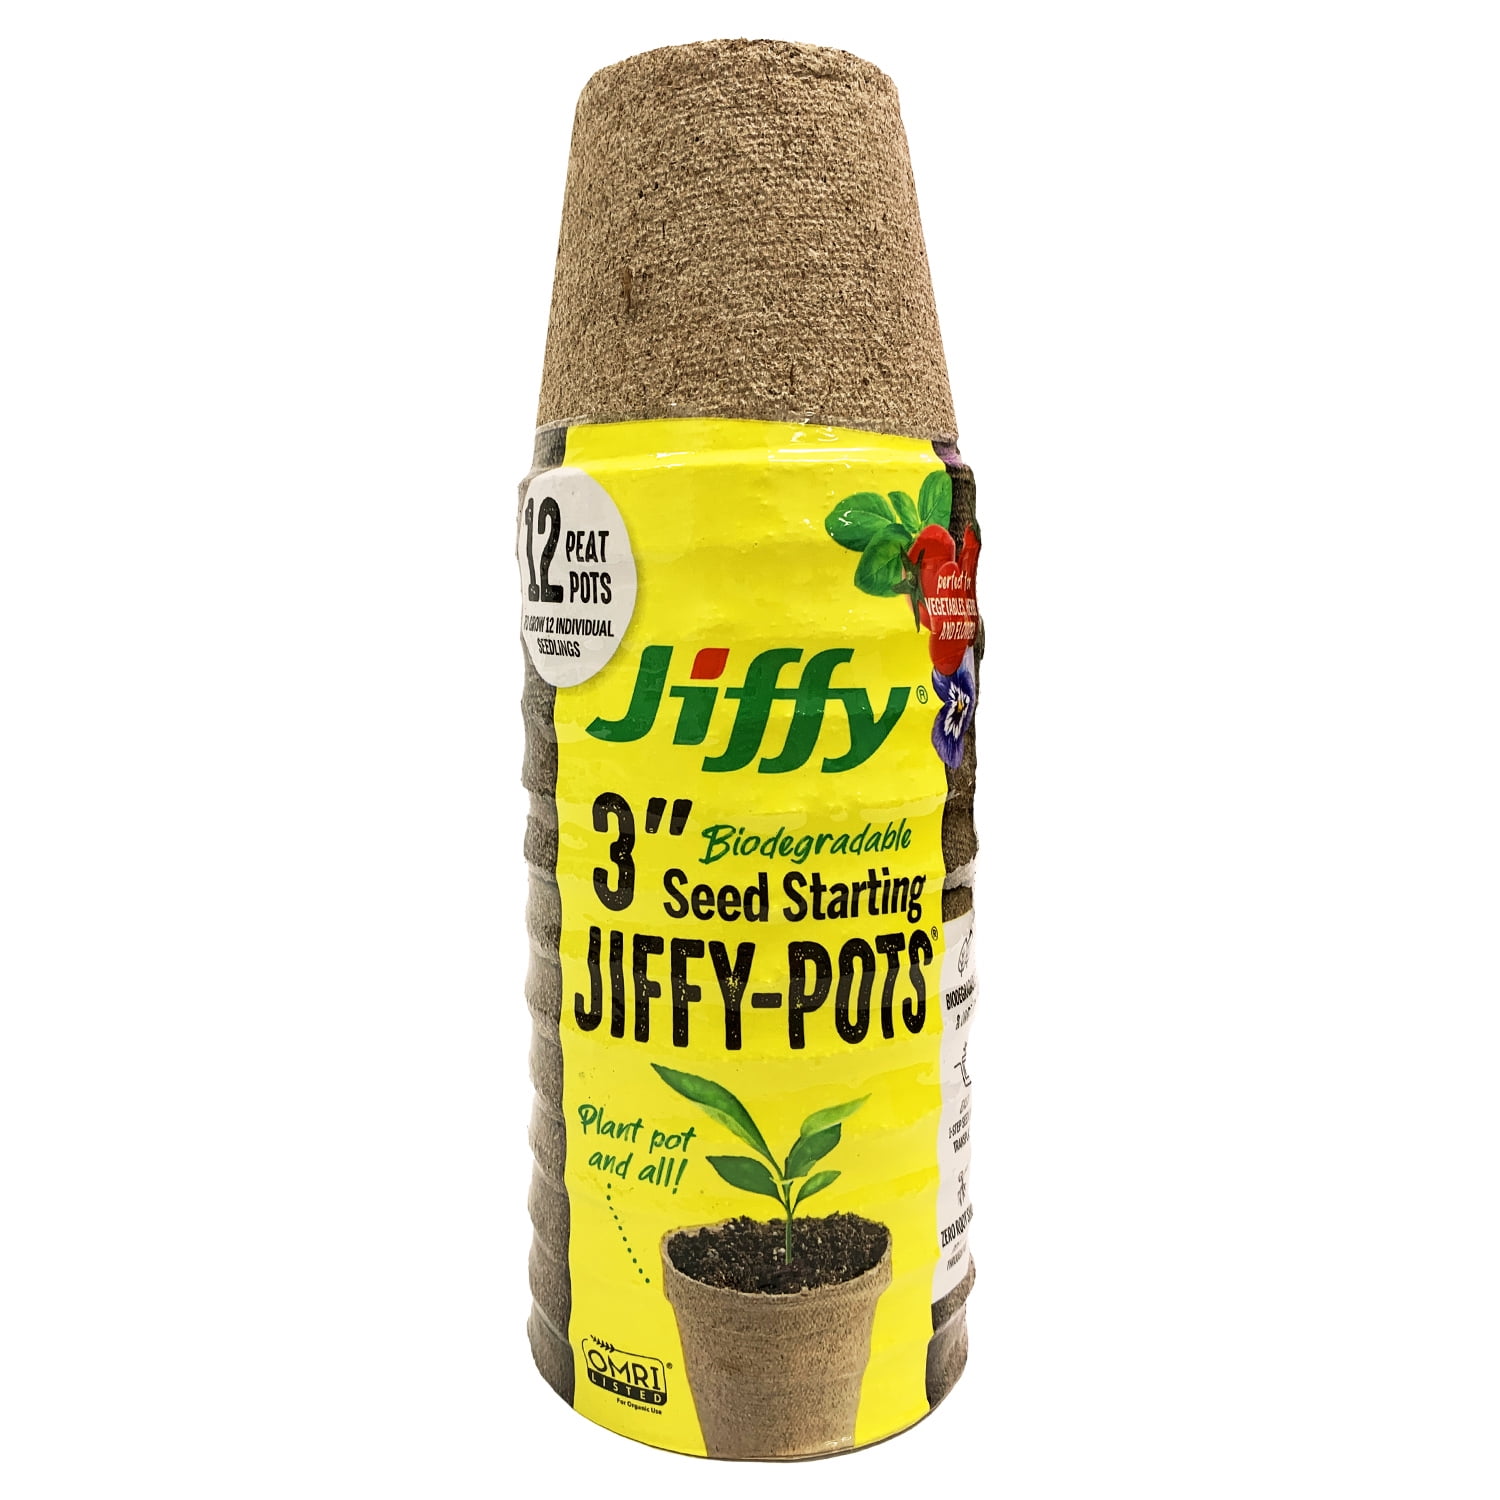 12-Pack JiffyPots Seed Starting Biodegradable 3" Diameter Peat Pots $2.97 + Free S&H w/ Walmart+ or $35+